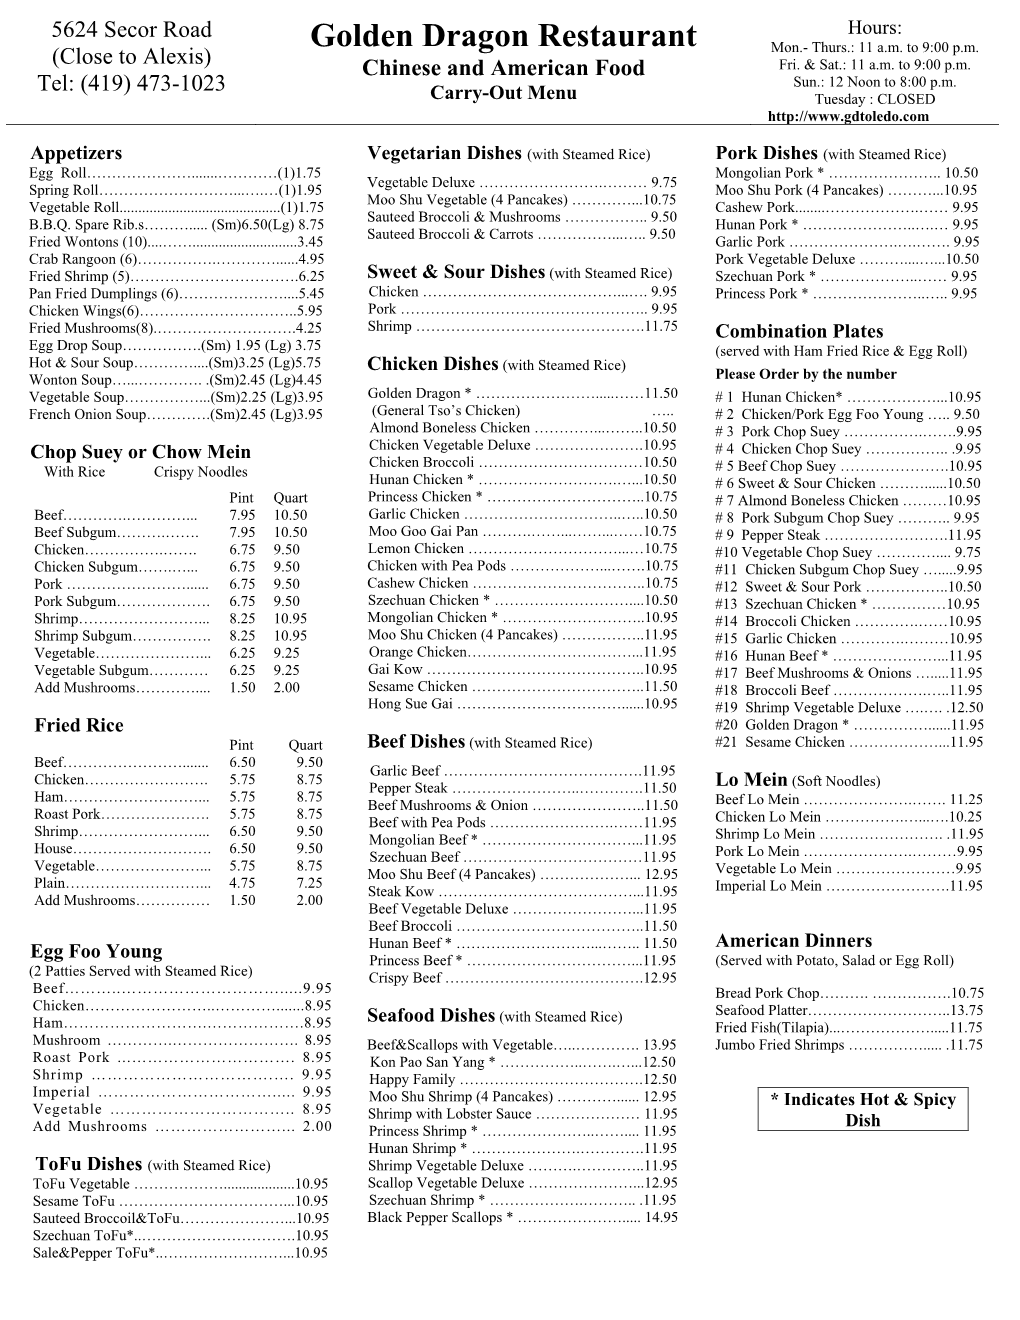 Check out the Full Menu